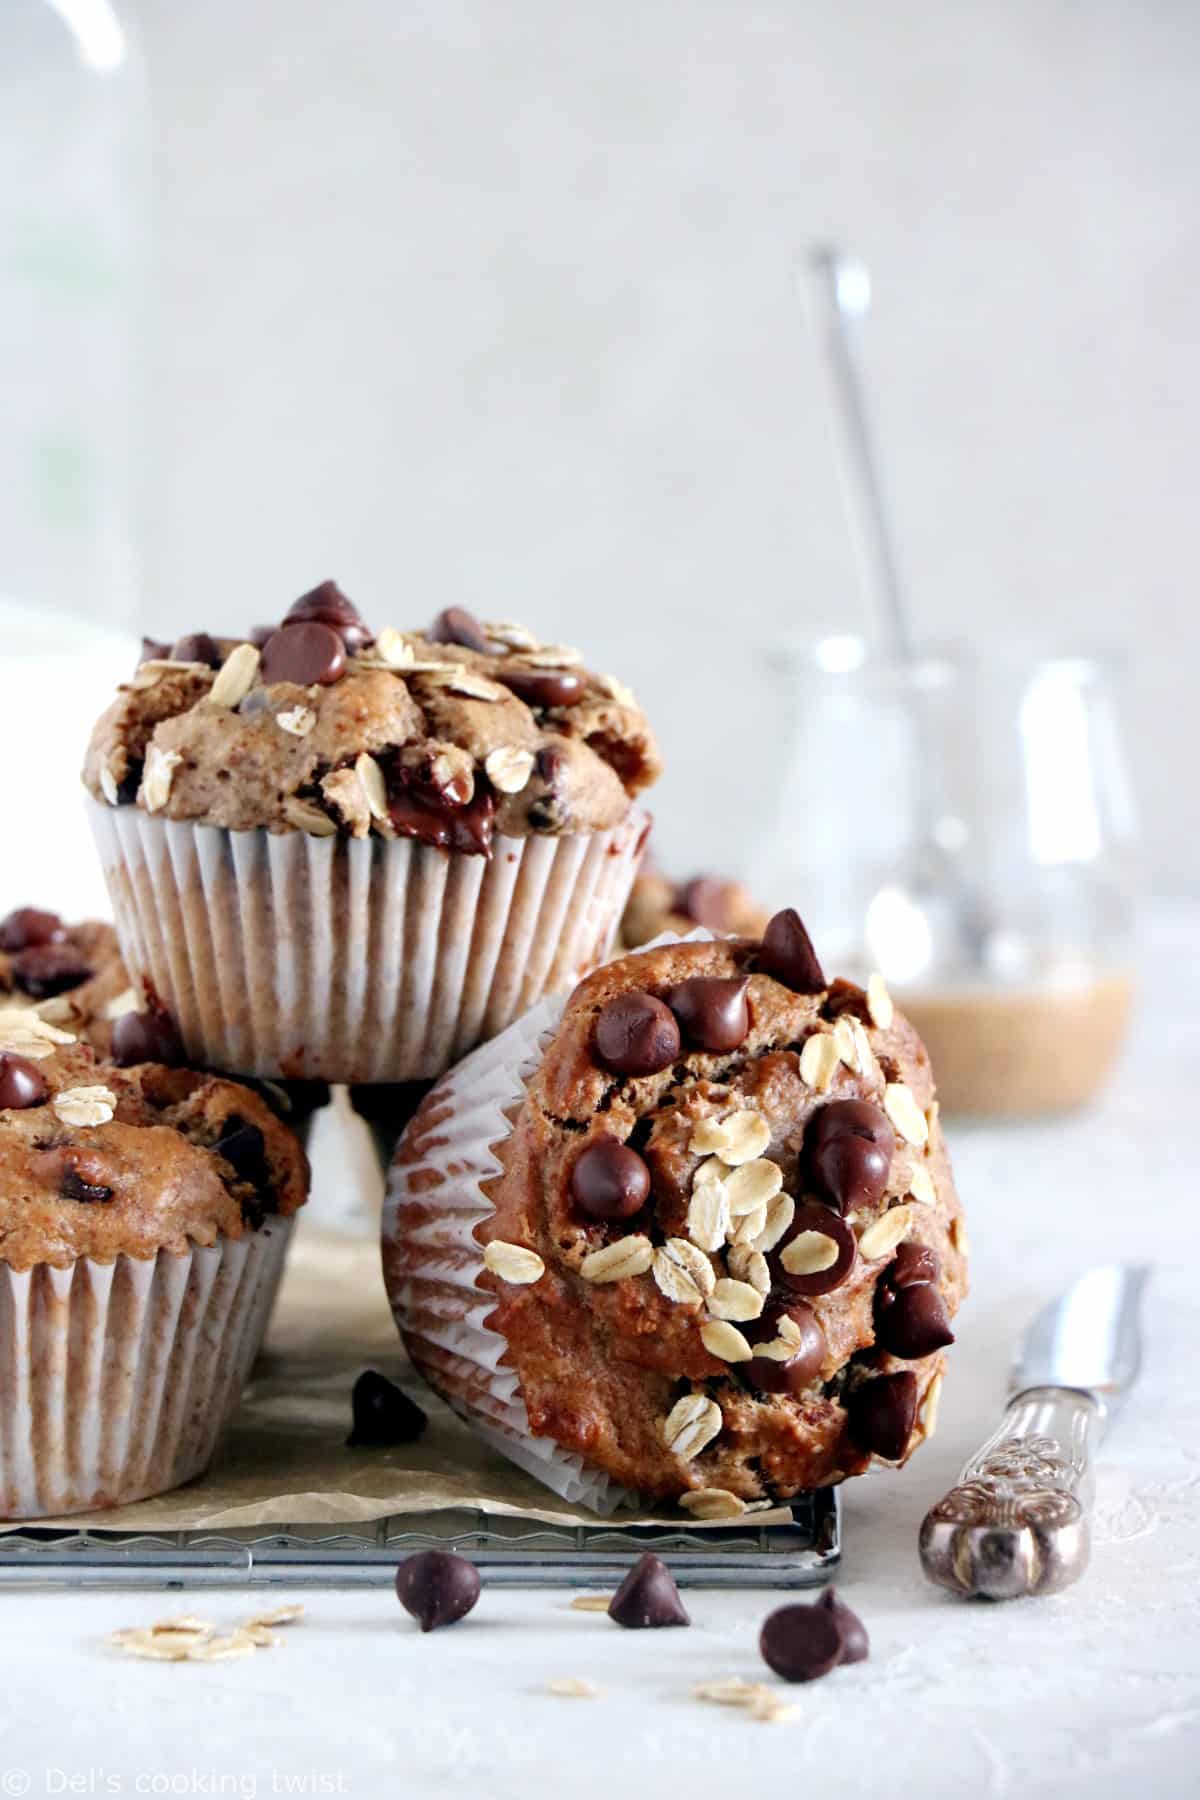 These sugar-free almond butter banana muffins are on the healthy side. They are made with nutritious, wholesome ingredients and packed with fiber.